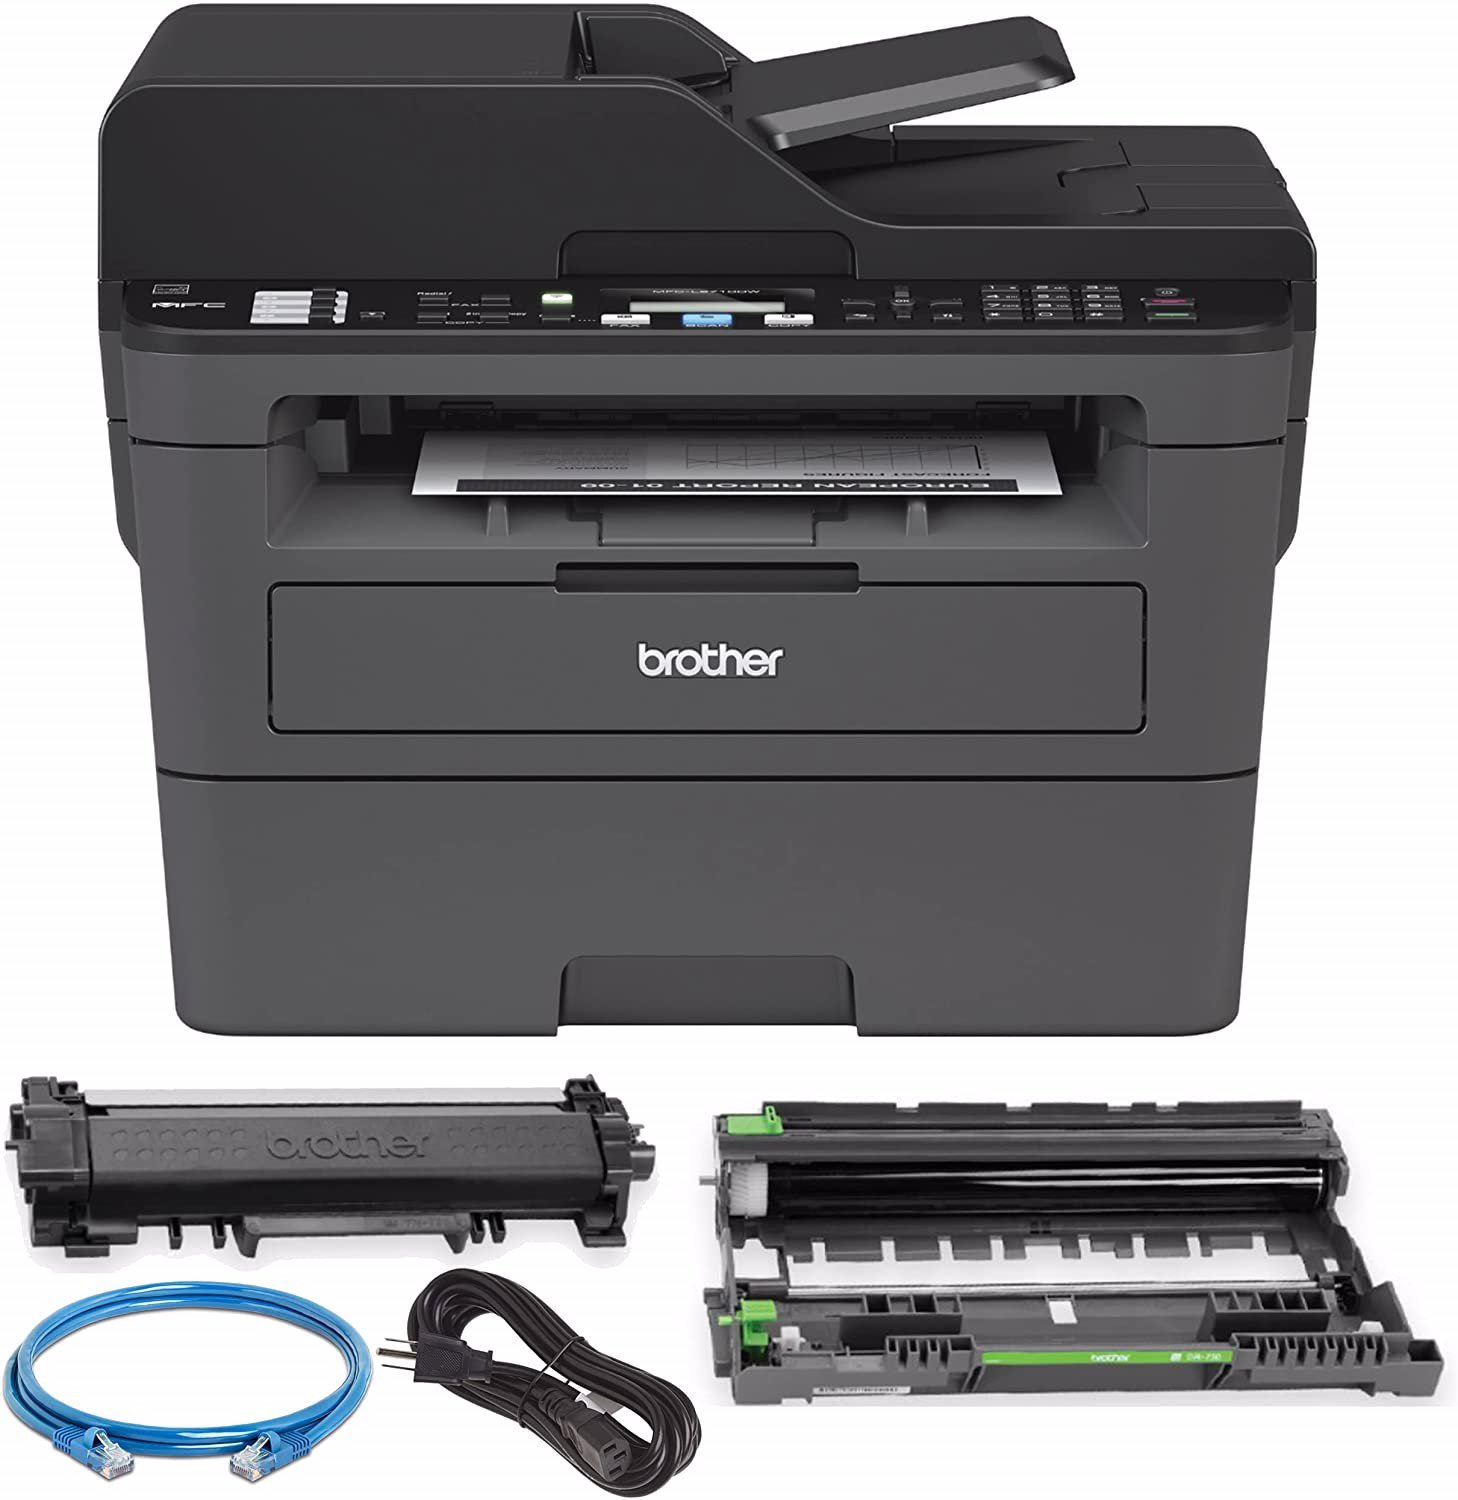 Brother Monochrome Laser Printer MFC-L2710DW, Compact All-in One Printer, Multifunction Printer, Wireless Networking and Duplex Printing